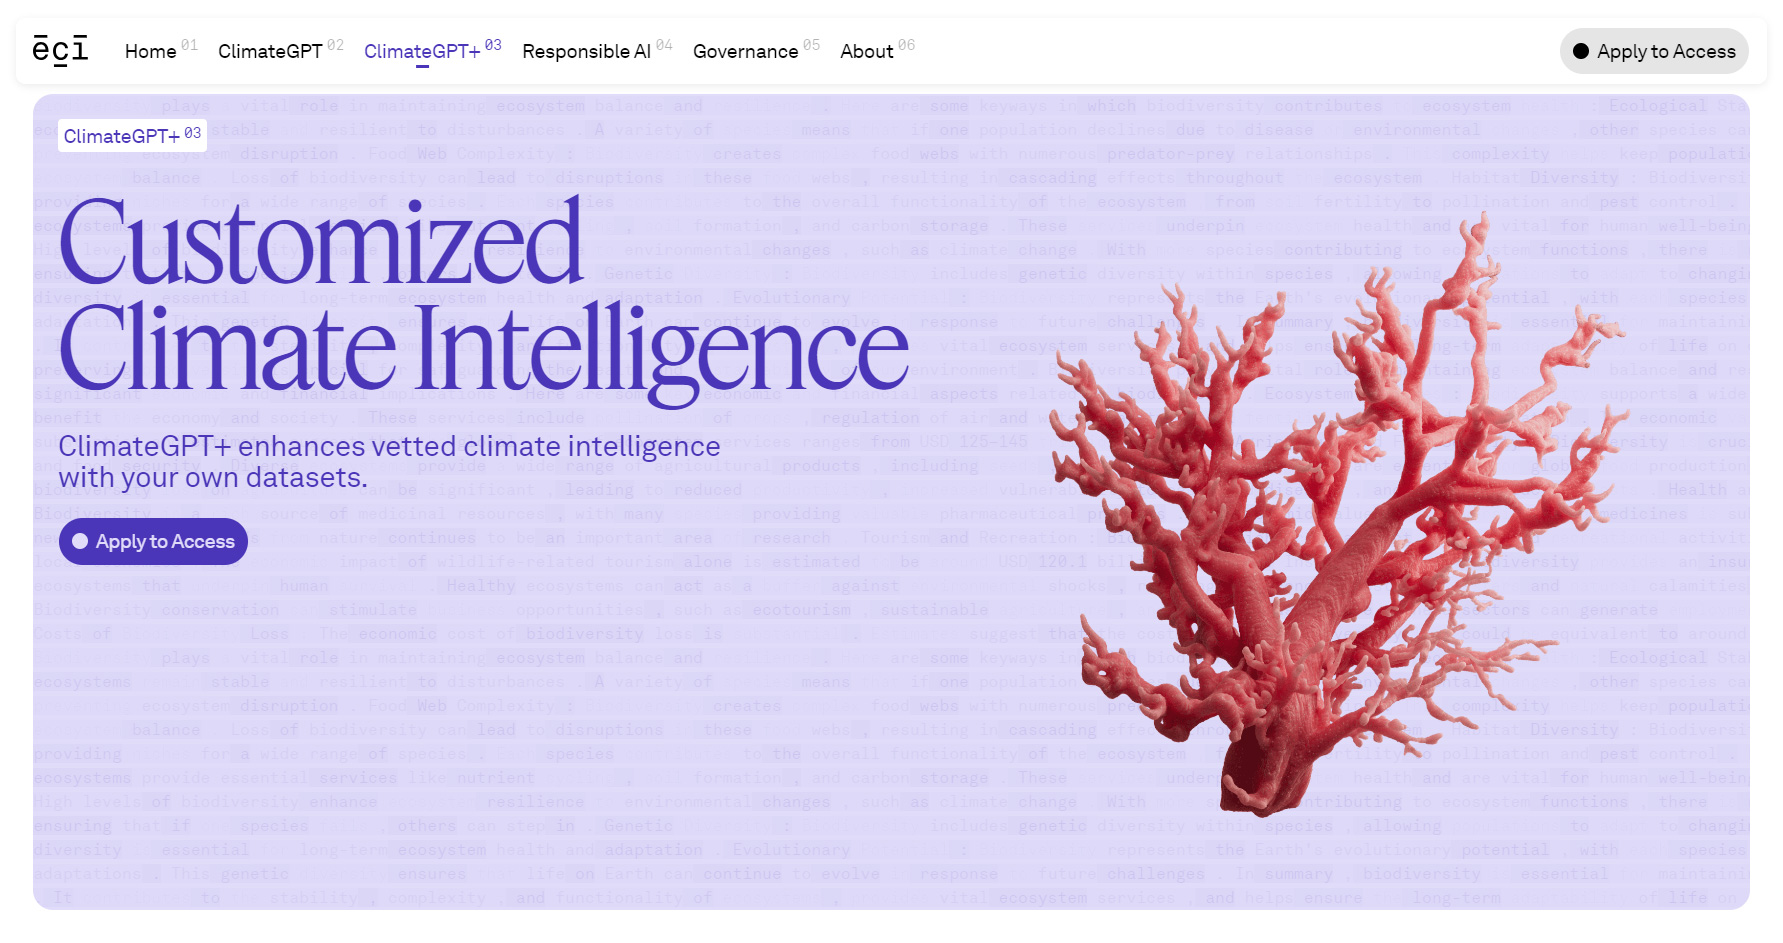 Endowment for Climate Intelligence - Website of the Day